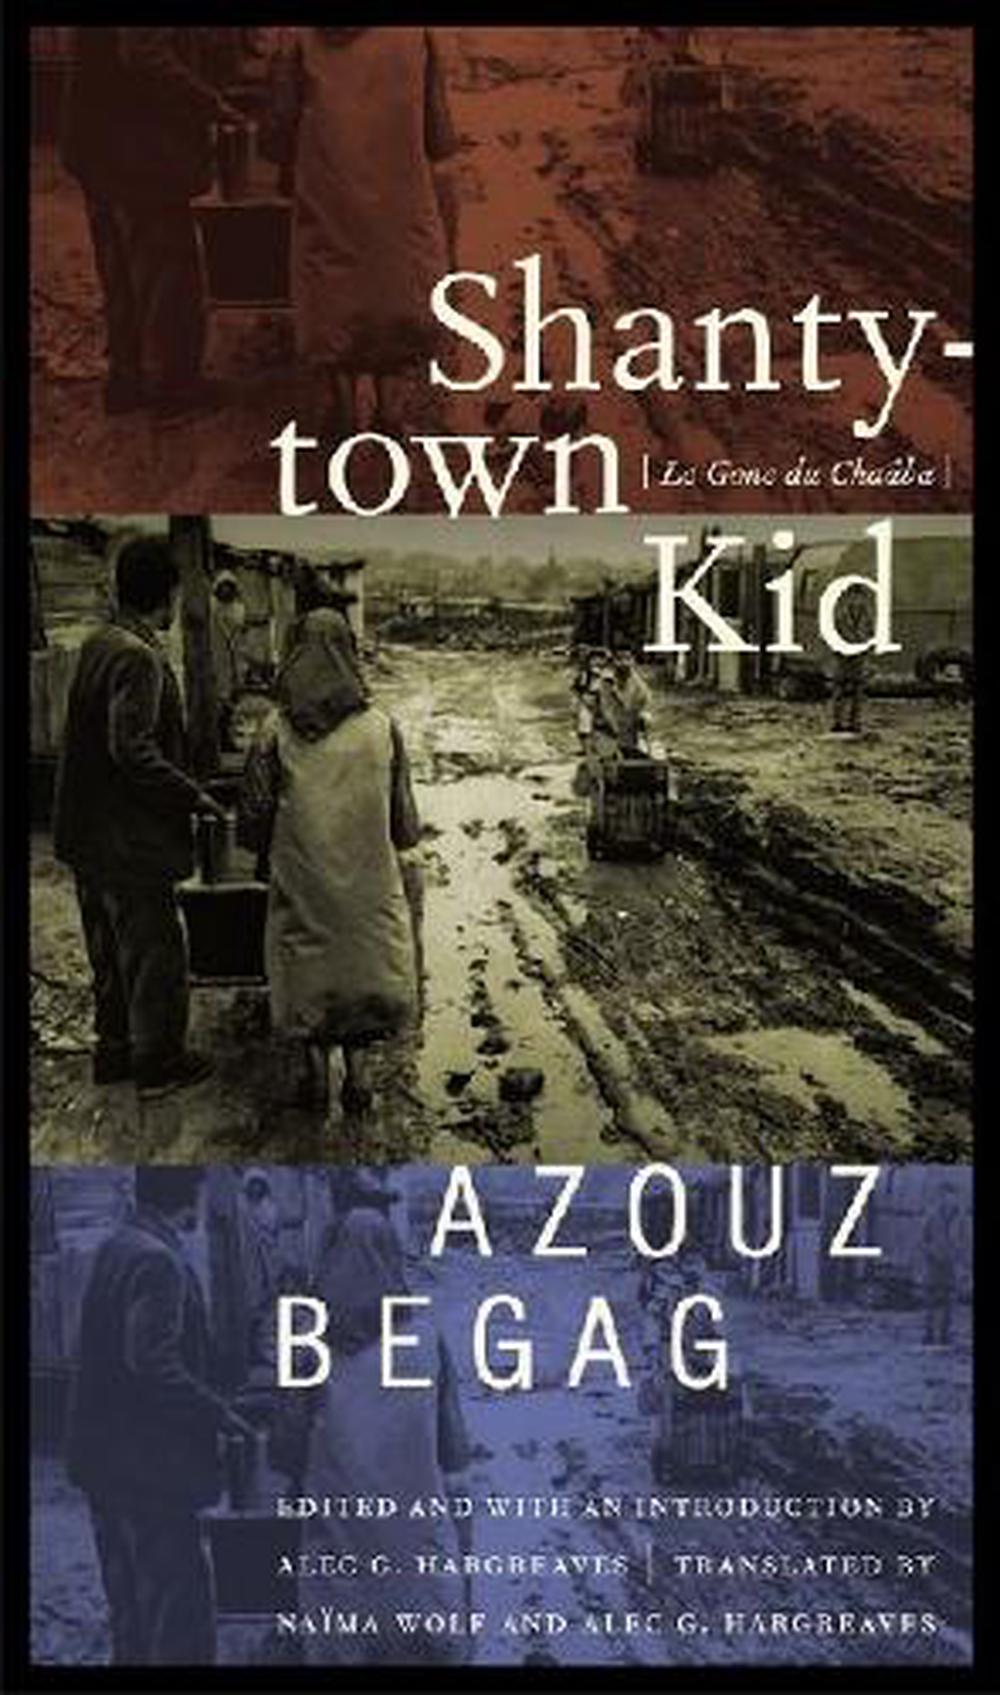 Shantytown Kid Le Gone Du Chaaba by Azouz Begag (English) Paperback Book Free S 9780803262584